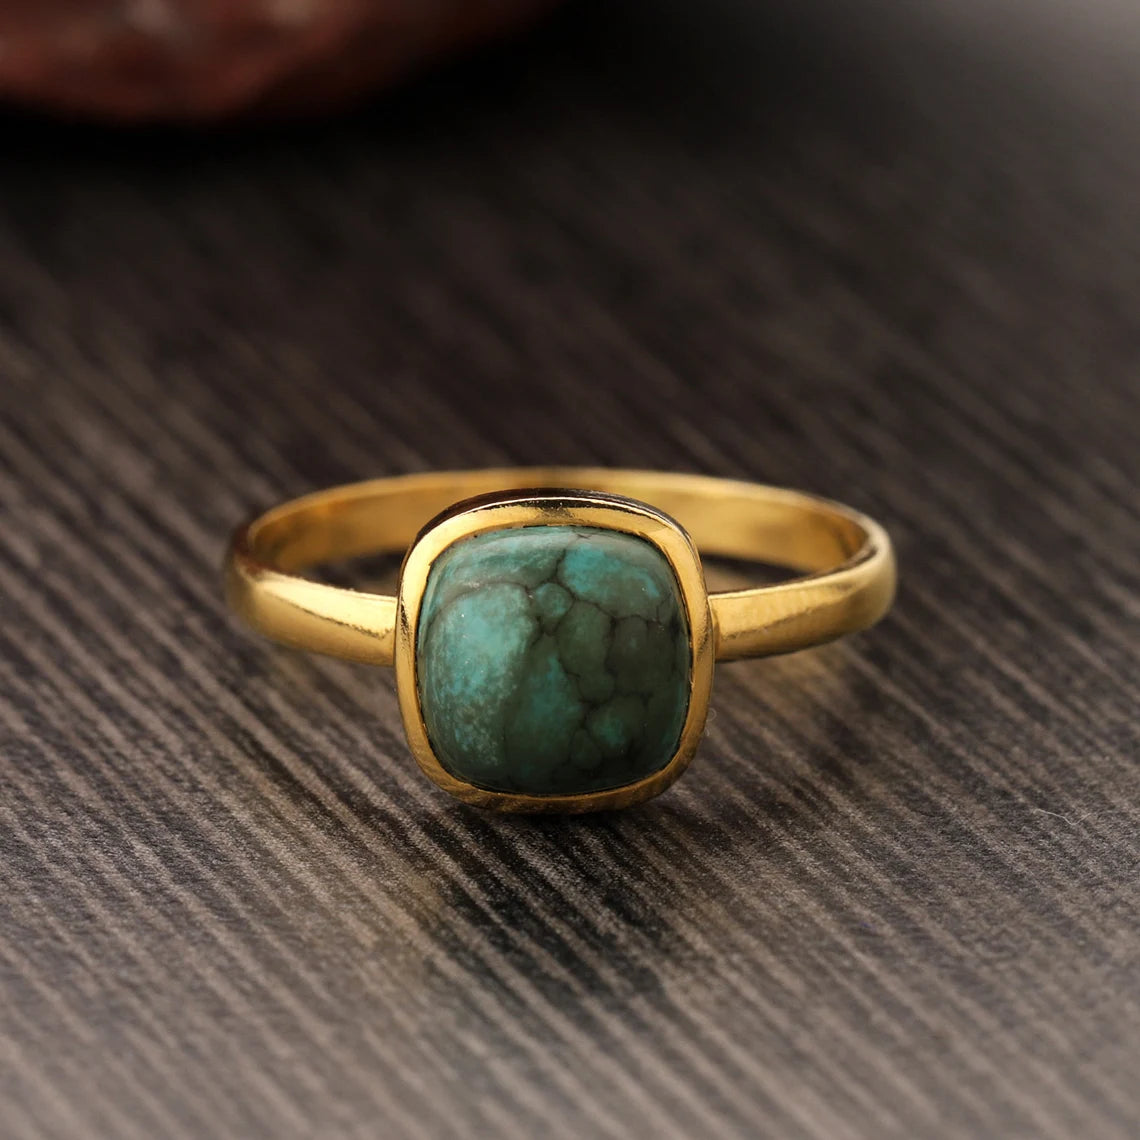 Turquoise ring, 92.5% Silver Ring, Silver Ring, Solid Sterling Silver Ring